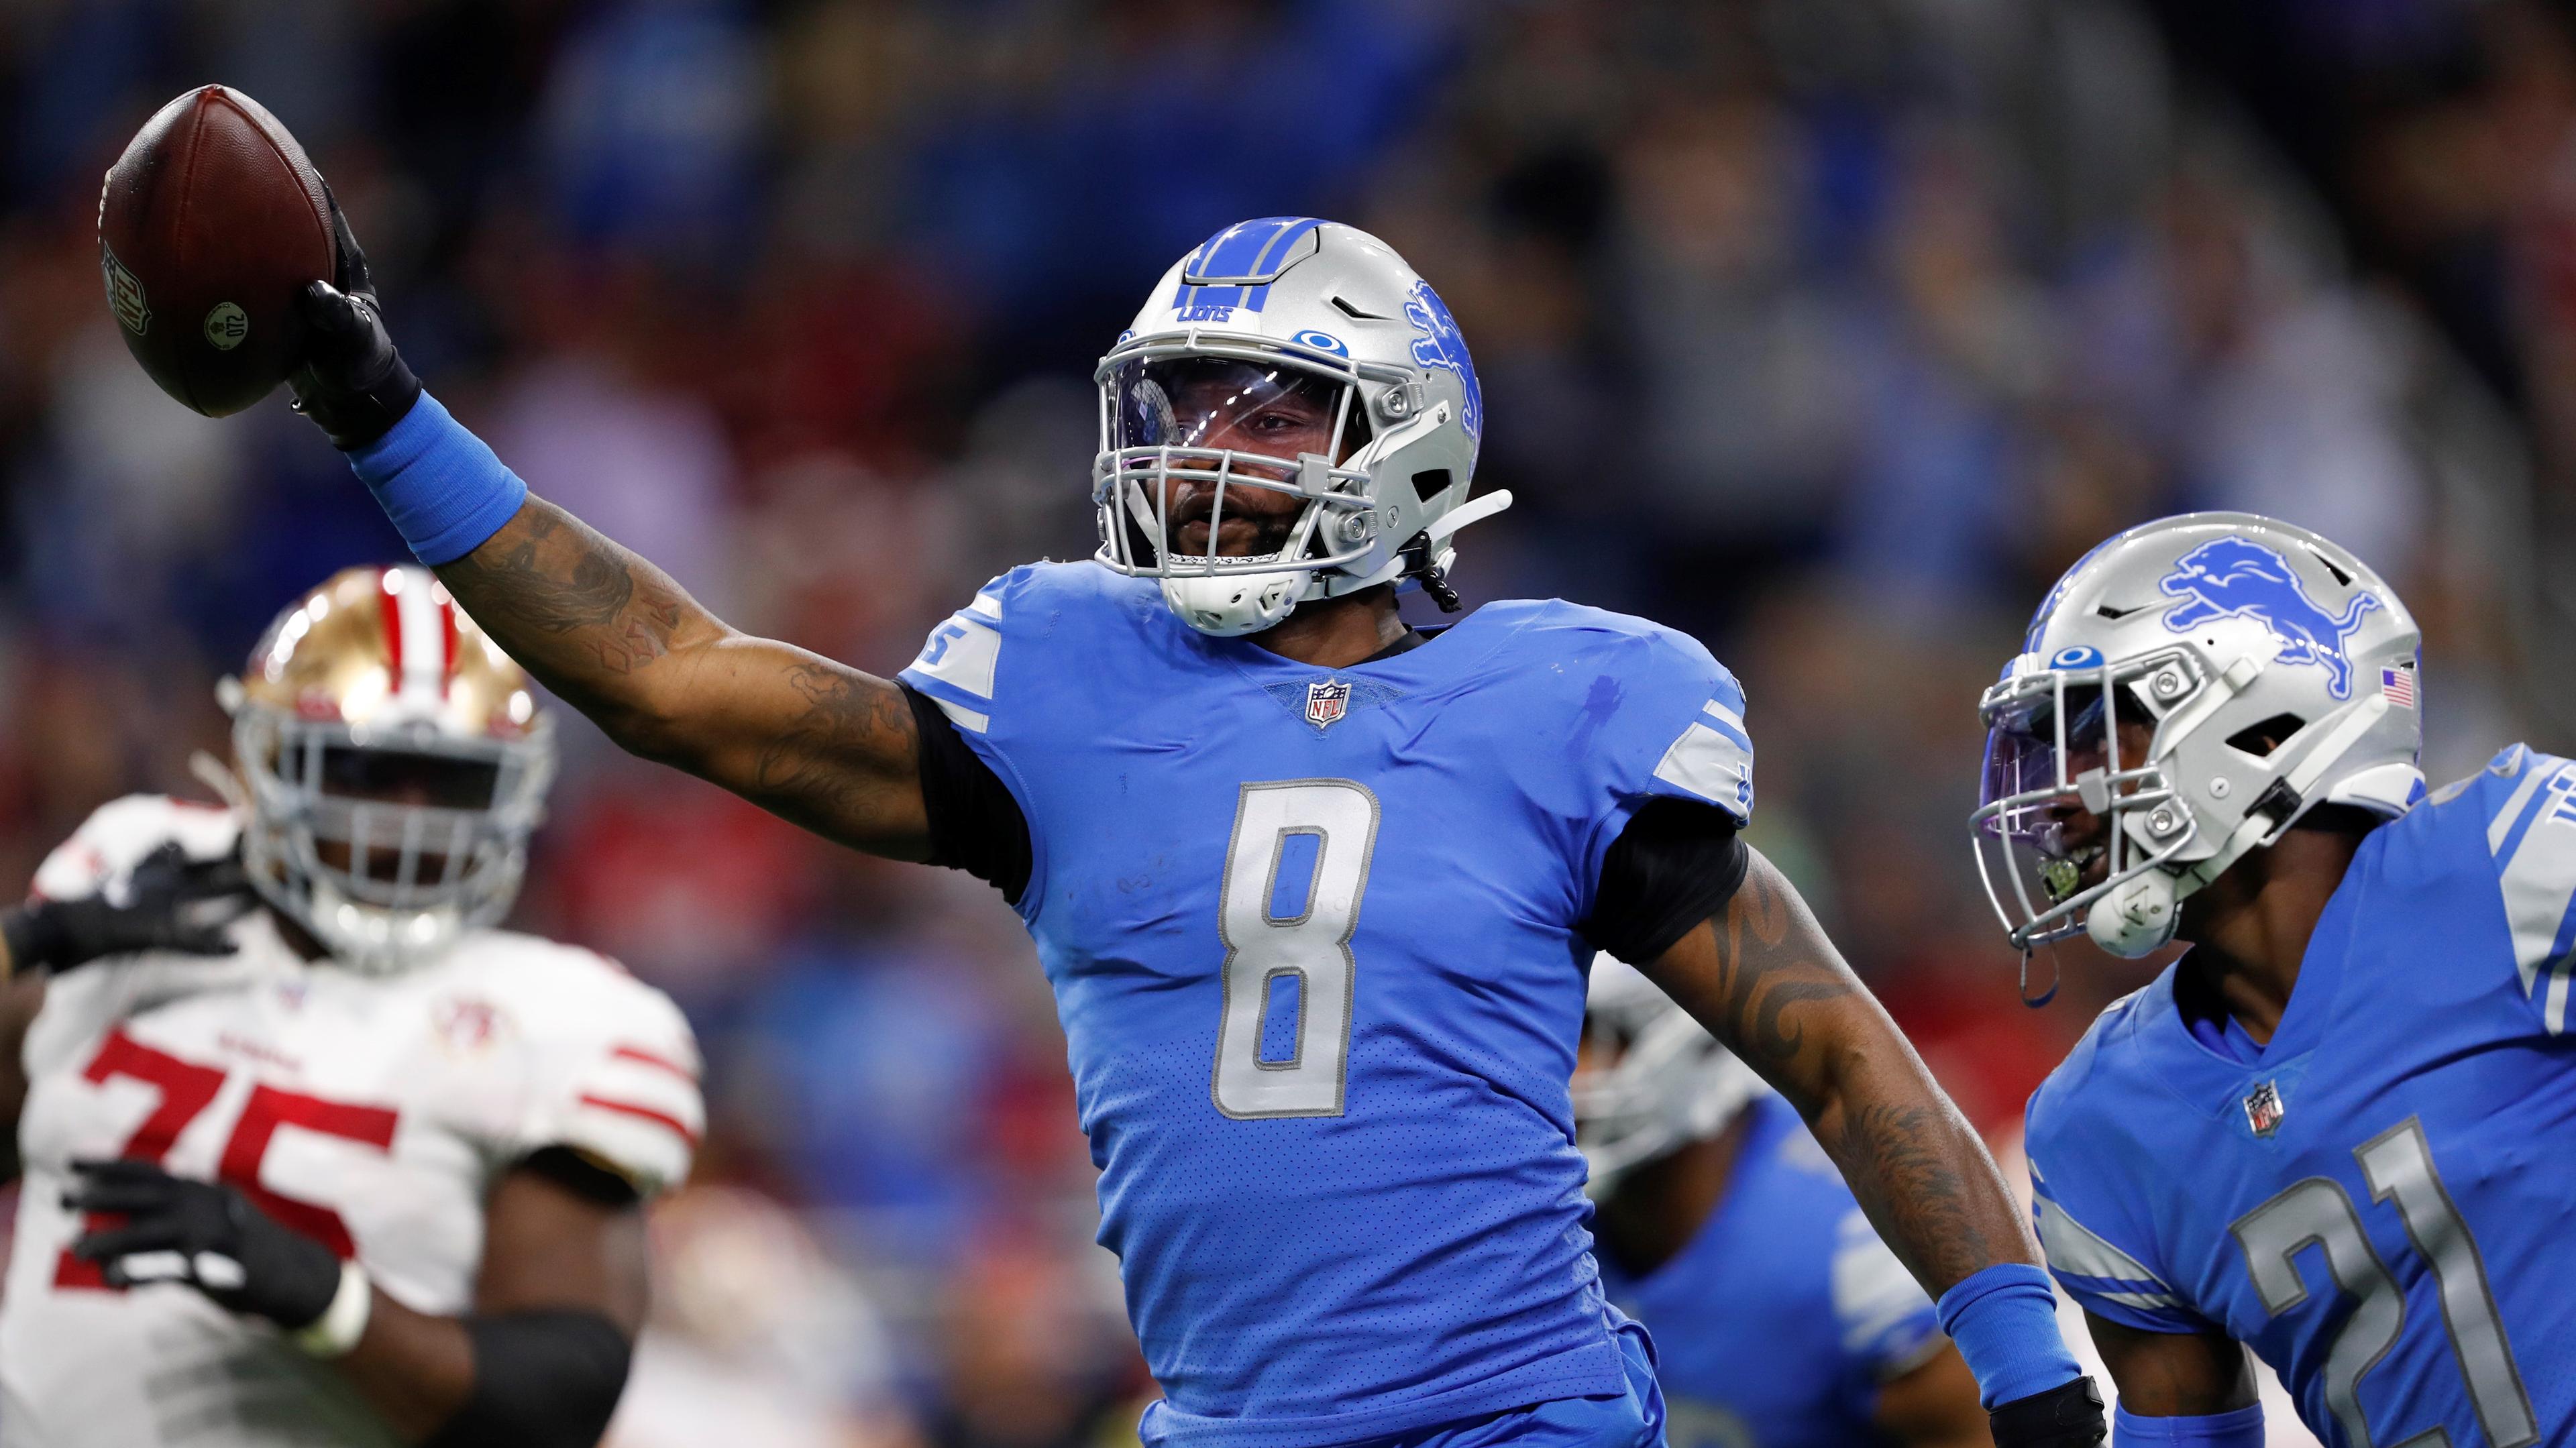 Sep 12, 2021; Detroit, Michigan, USA; Detroit Lions outside linebacker Jamie Collins (8) celebrates after recovering a fumble during the first quarter against the San Francisco 49ers at Ford Field. Mandatory Credit: Raj Mehta-USA TODAY Sports / Raj Mehta-USA TODAY Sports